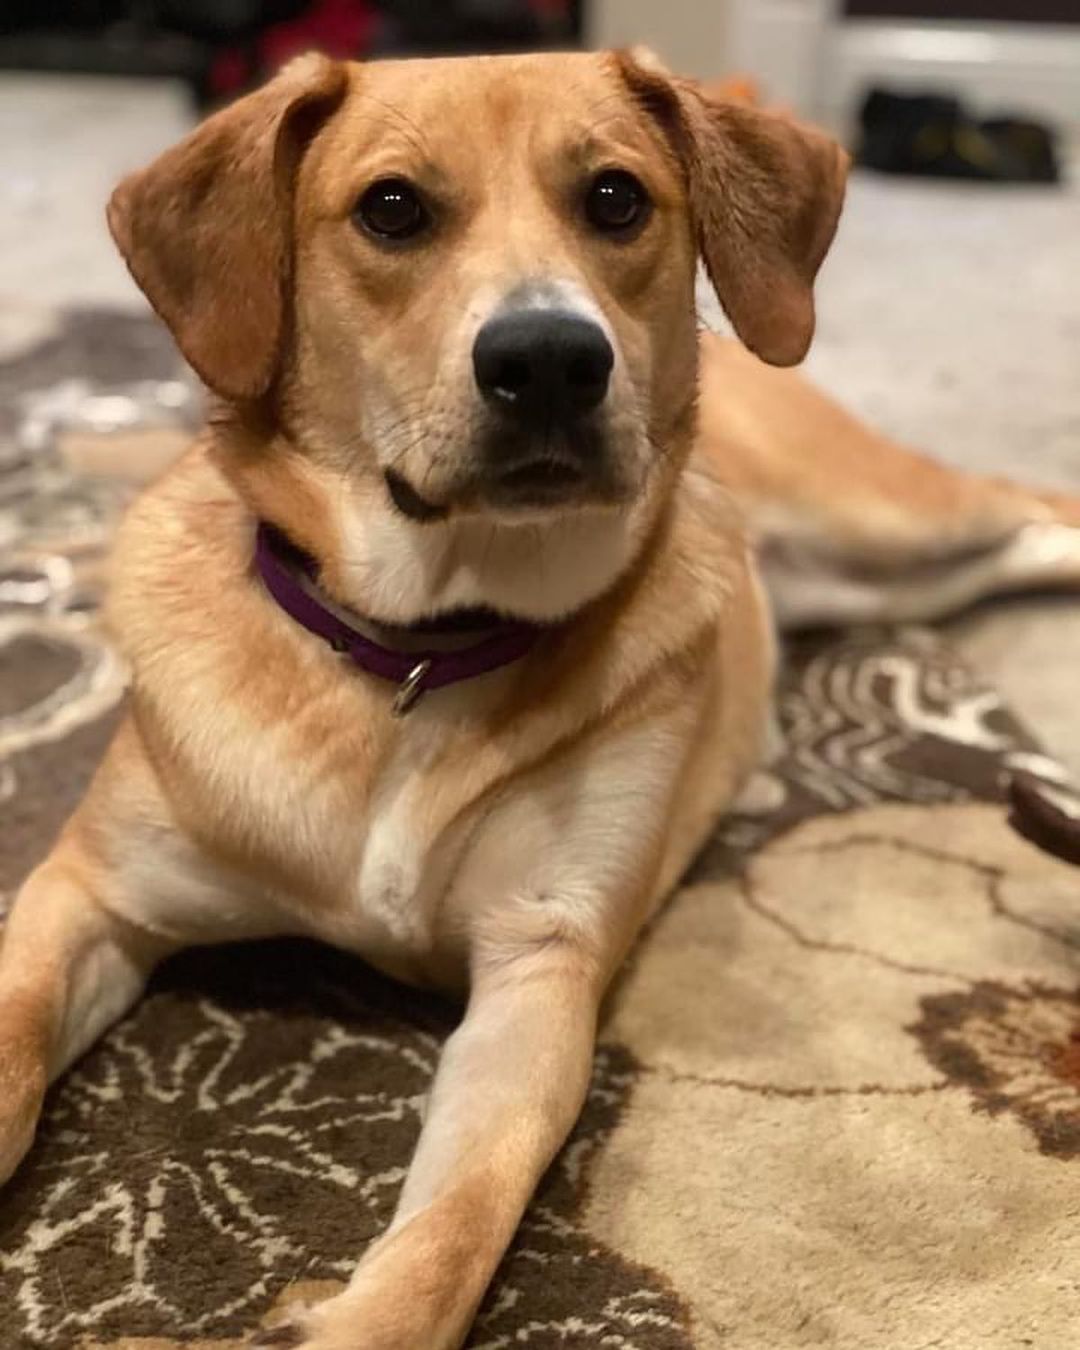 🌟 K I D  A P P R O V E D 🌟

So you’ve been searching for the perfect family dog? One who’s gentle and loving with little kids, house trained and just the right medium size? 🌟🌟🌟 We have your match! It’s Zara, this pretty lab mix who is hitting all the marks in her foster home. 

Zara is a 10 month old lab mix who’s 50lbs and loves everyone - kids, cats, dogs, adults- everyone. She has won the hearts of her foster home and we know she’ll make the best forever pup for another lucky family! Here’s what her foster mom has to say:

“Zara is pretty awesome. She would do amazing in a house with small kids as she relishes all sorts of attention.  She is the kind of dog who would endure a little girl dressing her up like a princess, or she’d play hide and seek in the yard, she would also be the kind of dog to sit under a highchair and hope for scraps.

She loves kids! Loves them! In fact, when she hears a little giggle she will drag you to the ends of the earth to get to the source. She knows that kids play and that’s all she wants to do.  She loves toys, other dogs, and cats too. She’s housebroken and still very young at only 10 months old.  Zara dislikes baths but was perfectly happy playing in the rain when it was muddy. She is still learning to stay off the furniture and not beg for food, so some of her house manners could use a little work but she is well-adjusted and happy, with a tail that constantly wags. My son described her as the perfect “fun sized” dog.  Not like a big candy bar or a mini… but that perfect size in the middle, the “fun size”. “

We love that description! Fun-size, kid-approved Zara is ready to make your life a little brighter! Apply for her today at https://www.shelterluv.com/matchme/adopt/HTH/Dog

<a target='_blank' href='https://www.instagram.com/explore/tags/adoptme/'>#adoptme</a> <a target='_blank' href='https://www.instagram.com/explore/tags/rescuedog/'>#rescuedog</a> <a target='_blank' href='https://www.instagram.com/explore/tags/labmix/'>#labmix</a> <a target='_blank' href='https://www.instagram.com/explore/tags/funsize/'>#funsize</a> <a target='_blank' href='https://www.instagram.com/explore/tags/dogsofstl/'>#dogsofstl</a> <a target='_blank' href='https://www.instagram.com/explore/tags/familydog/'>#familydog</a> <a target='_blank' href='https://www.instagram.com/explore/tags/kidapproved/'>#kidapproved</a> <a target='_blank' href='https://www.instagram.com/explore/tags/catfriendly/'>#catfriendly</a> <a target='_blank' href='https://www.instagram.com/explore/tags/goodgirl/'>#goodgirl</a> <a target='_blank' href='https://www.instagram.com/explore/tags/dogsofstlouis/'>#dogsofstlouis</a> <a target='_blank' href='https://www.instagram.com/explore/tags/adoptdontshop/'>#adoptdontshop</a> <a target='_blank' href='https://www.instagram.com/explore/tags/fosteringsaveslives/'>#fosteringsaveslives</a> <a target='_blank' href='https://www.instagram.com/explore/tags/love/'>#love</a> <a target='_blank' href='https://www.instagram.com/explore/tags/yellowlab/'>#yellowlab</a>